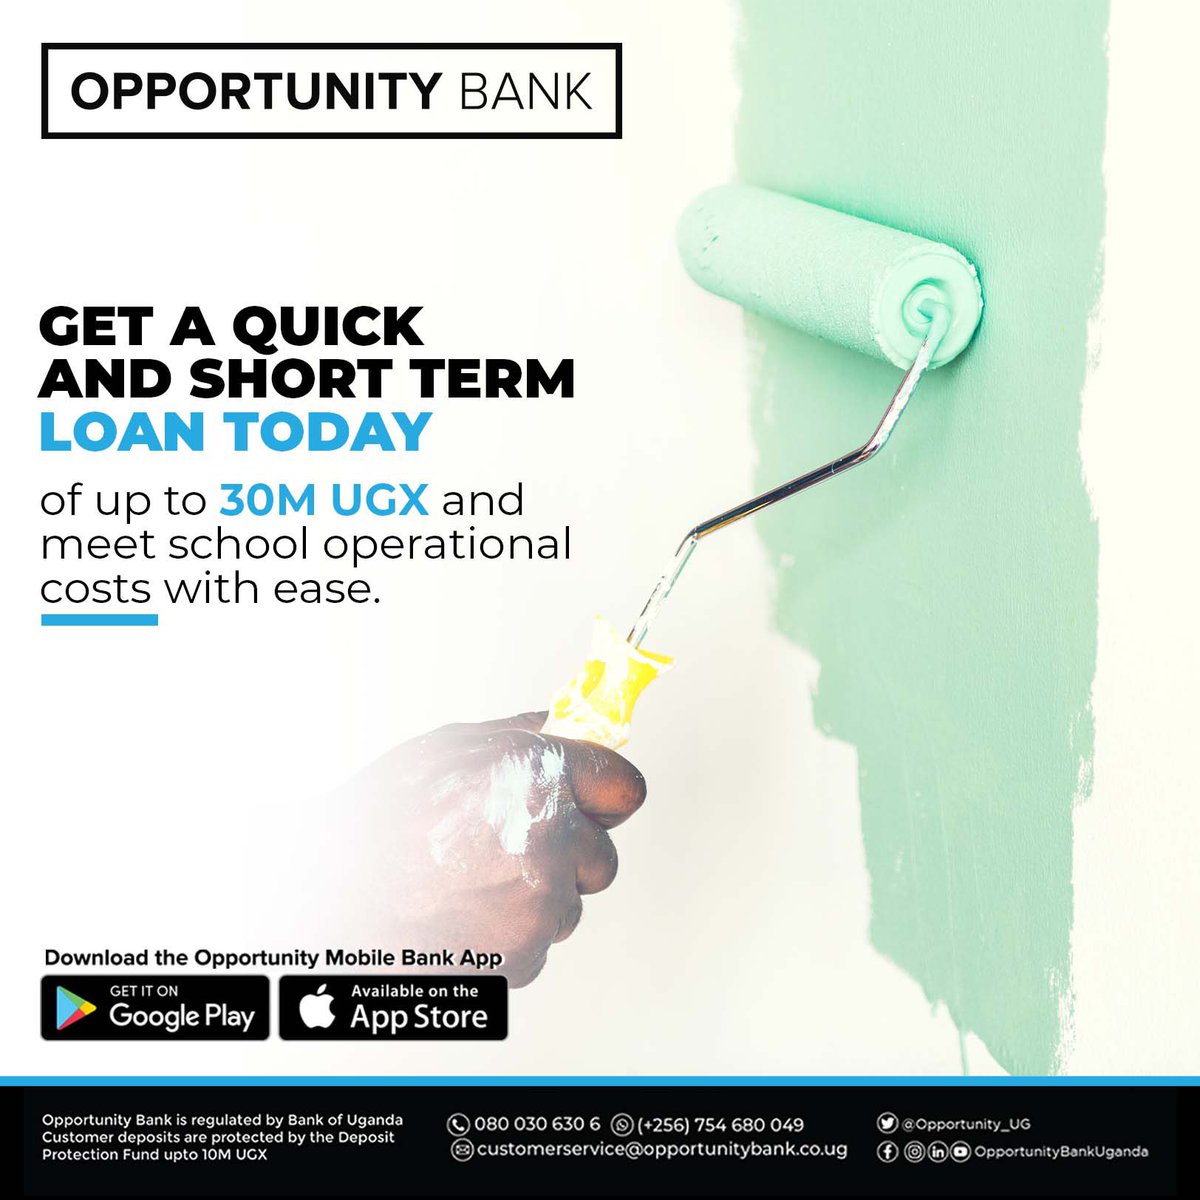 Start the term prepared and with less pressure. Prevent financial loss and pay urgent bills needed in the holiday with our bridge financing loan within 48hrs.
It’s quick, short and reliable 
#educationfinance #schoolimprovement